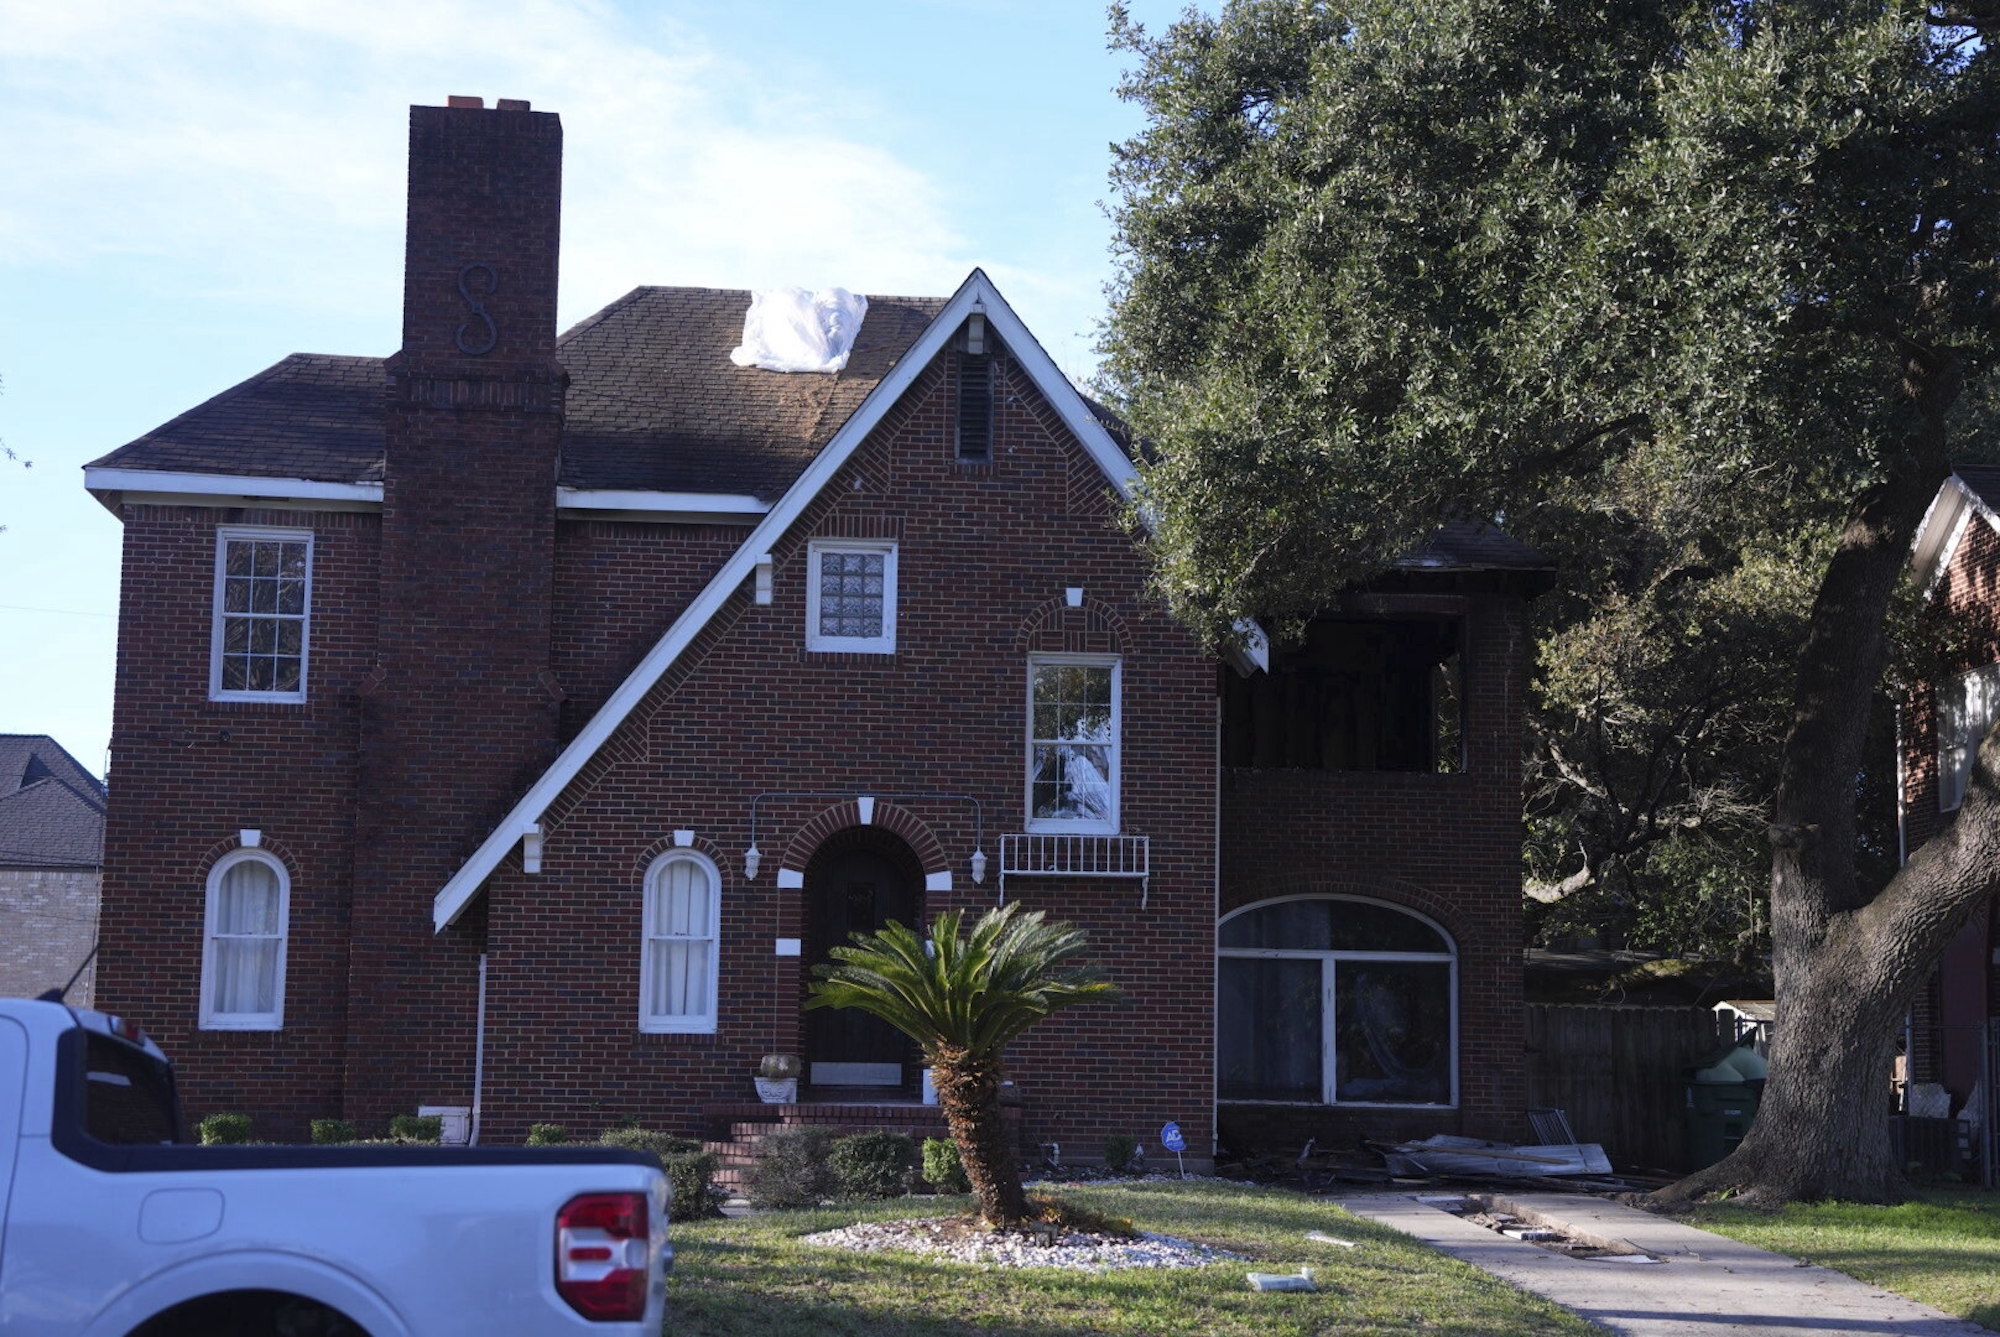 Beyoncé's childhood home in Houston catches fire Christmas morning | CNN